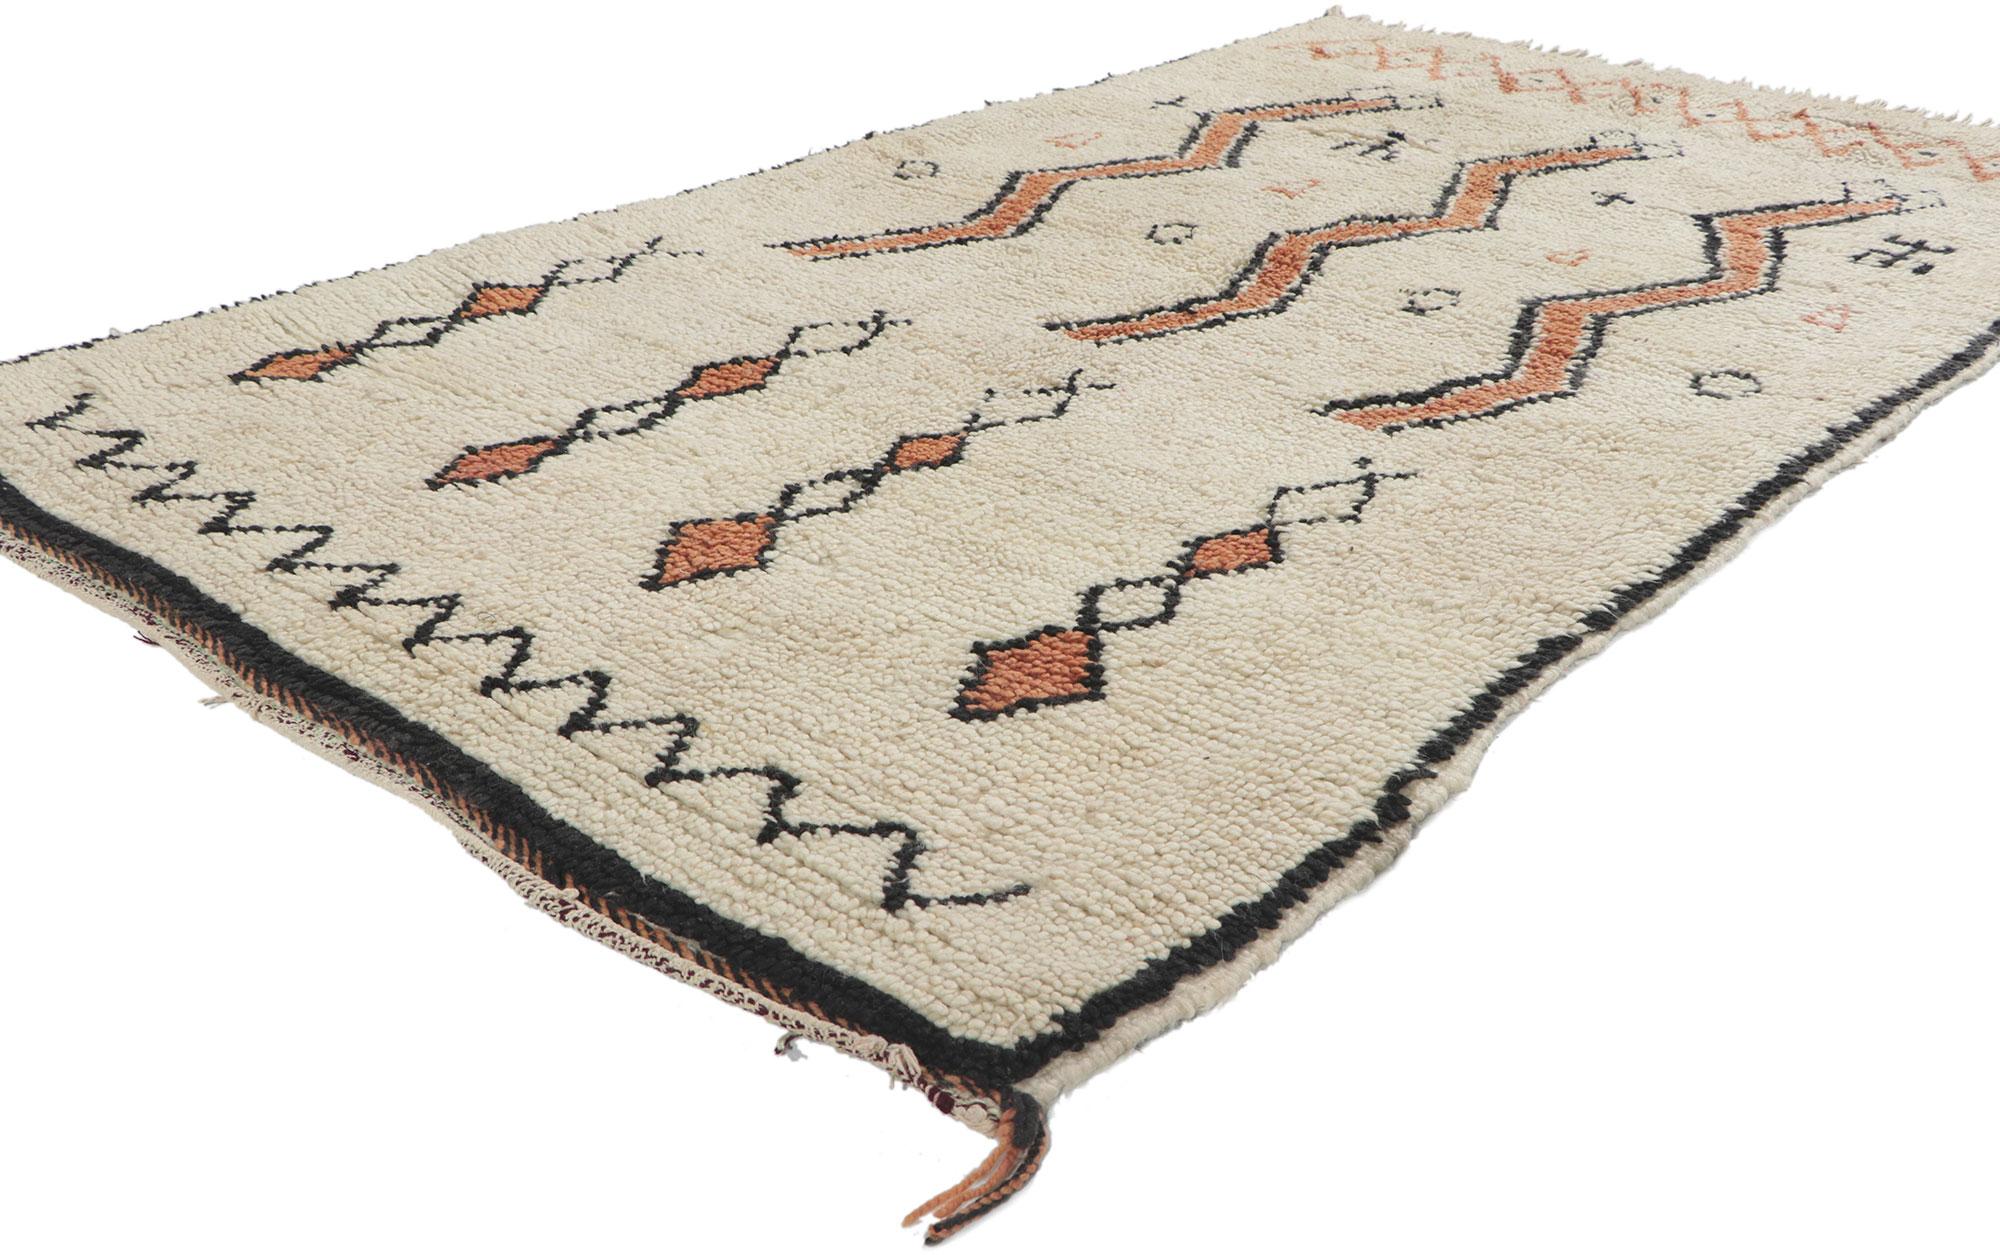 78401 Vintage Moroccan Beni Ourain rug, 03'09 x 07'00. With its nomadic charm, plush pile, incredible detail and texture, this hand knotted wool vintage Beni Ourain Moroccan rug is a captivating vision of woven beauty. The eye-catching tribal